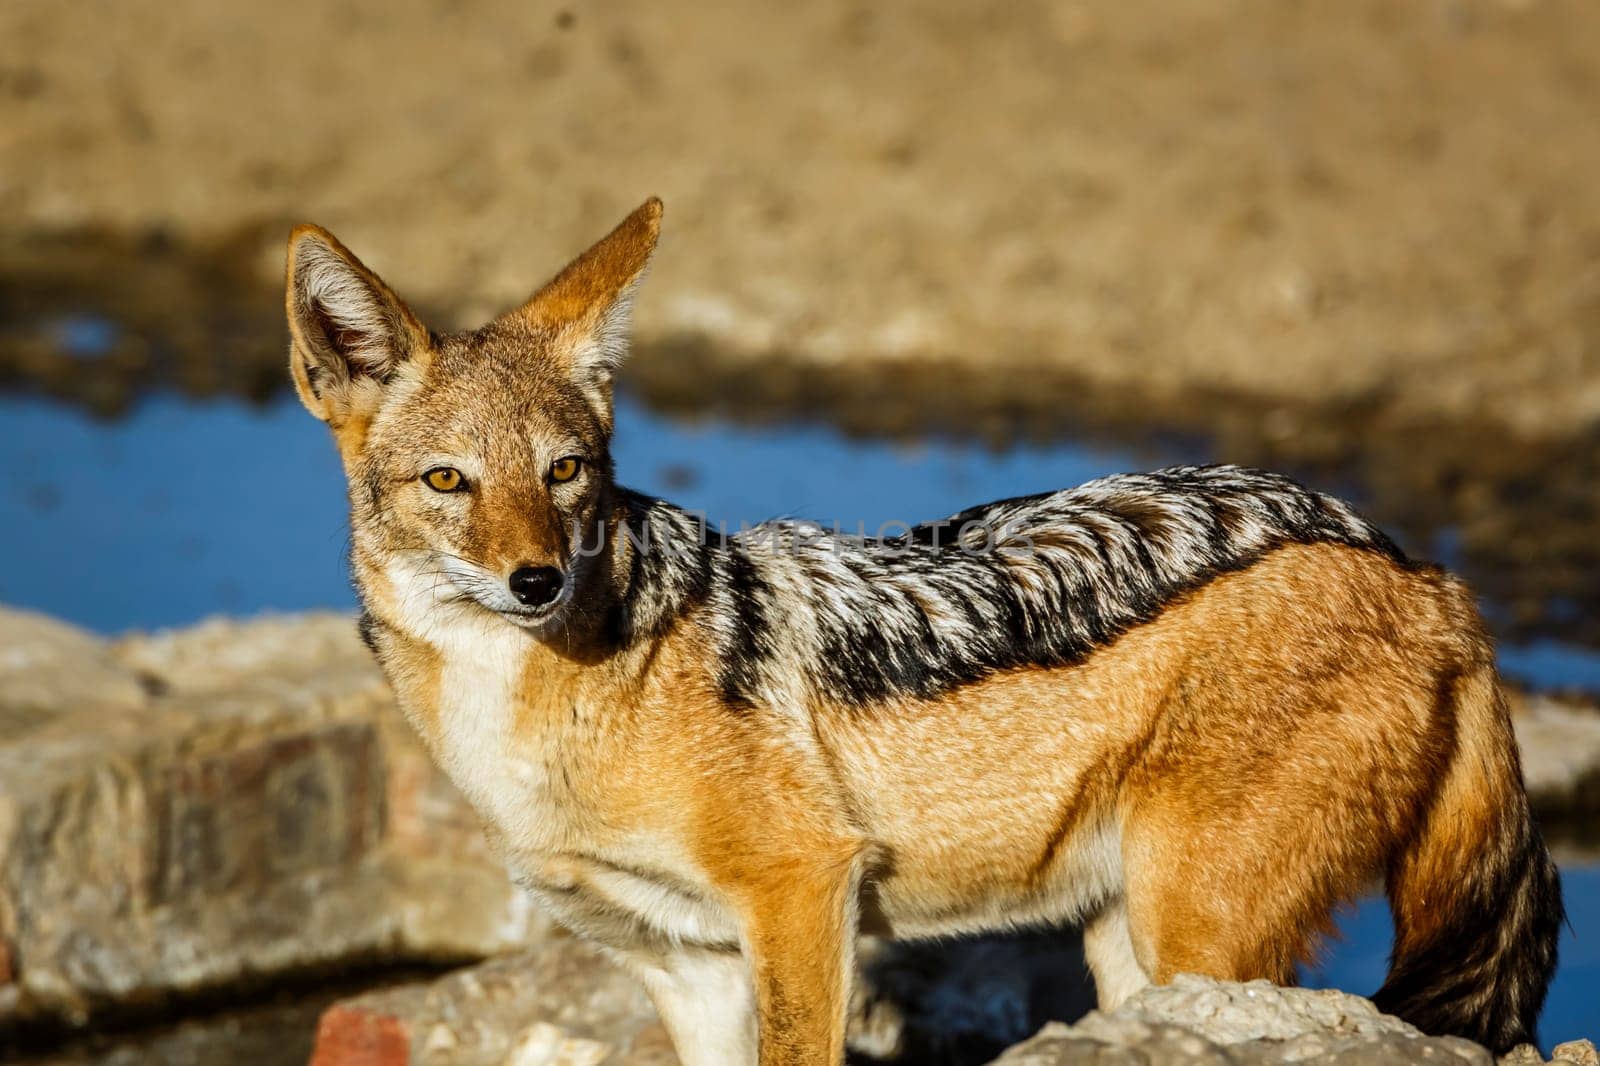 Black backed jackal portrait at waterhole in Kgalagadi transfrontier park, South Africa ; Specie Canis mesomelas family of Canidae